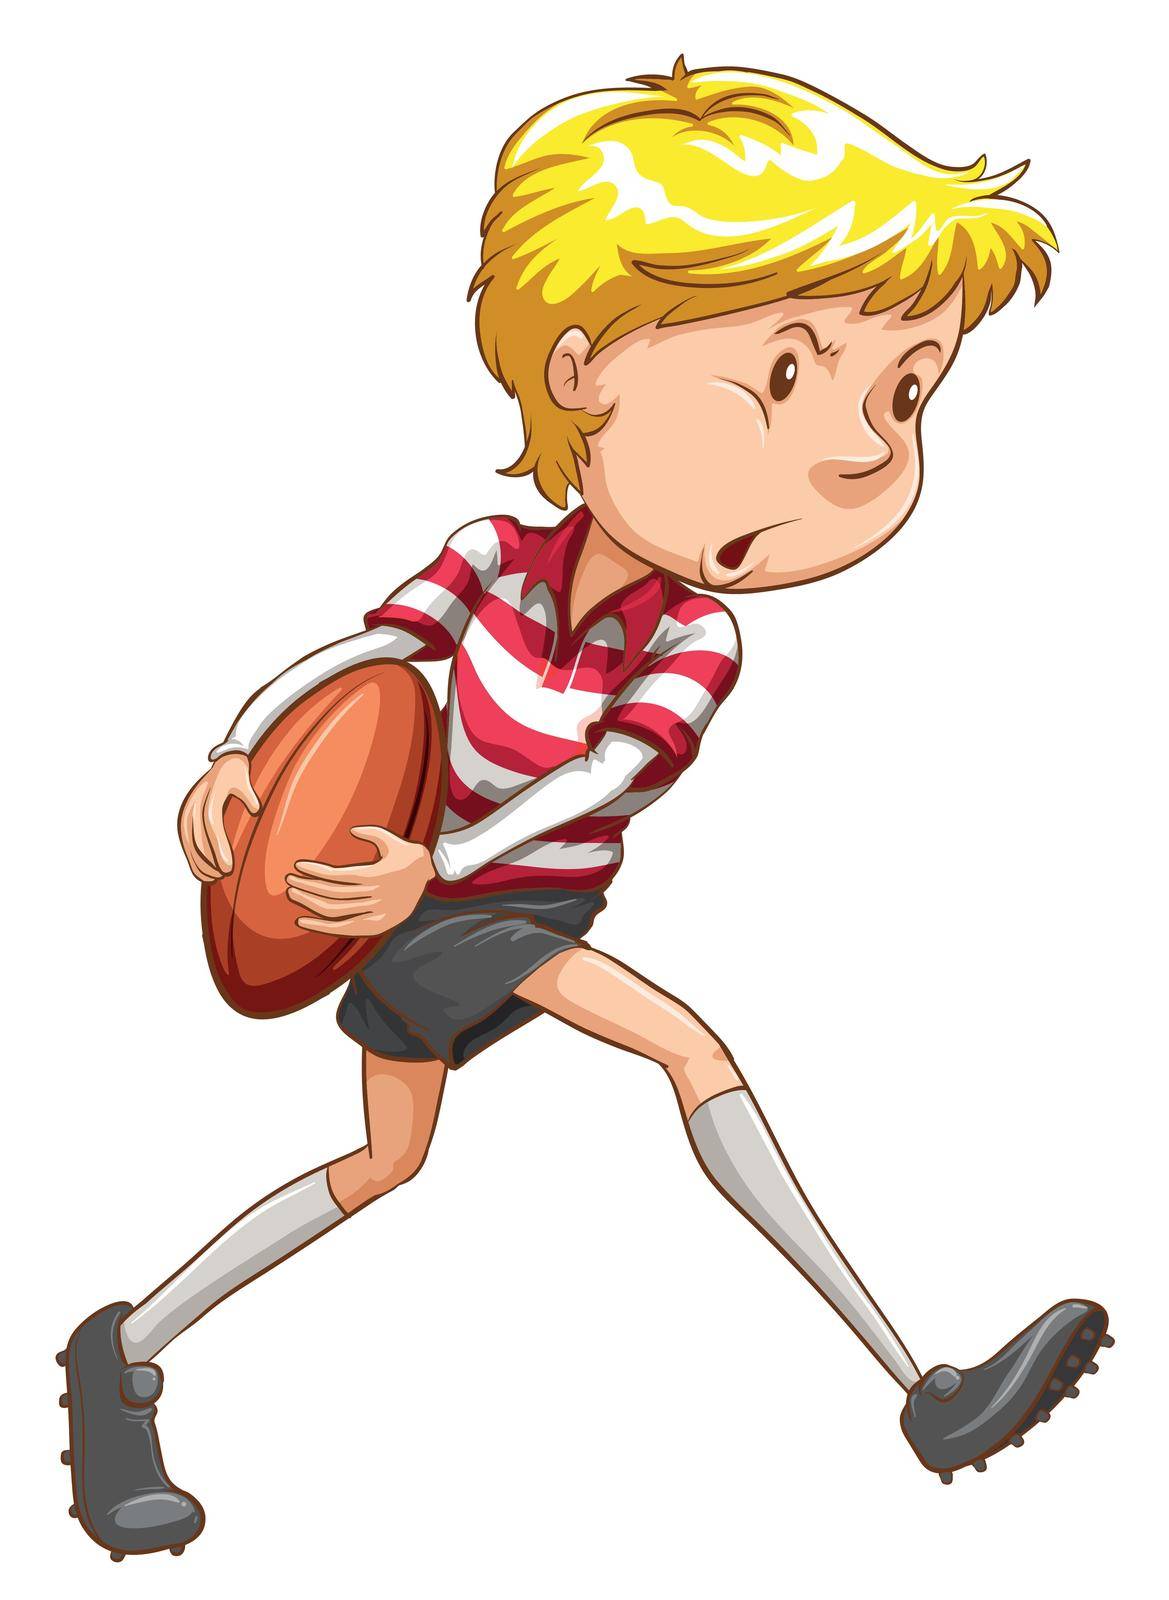 A simple sketch of a rugby player by iimages